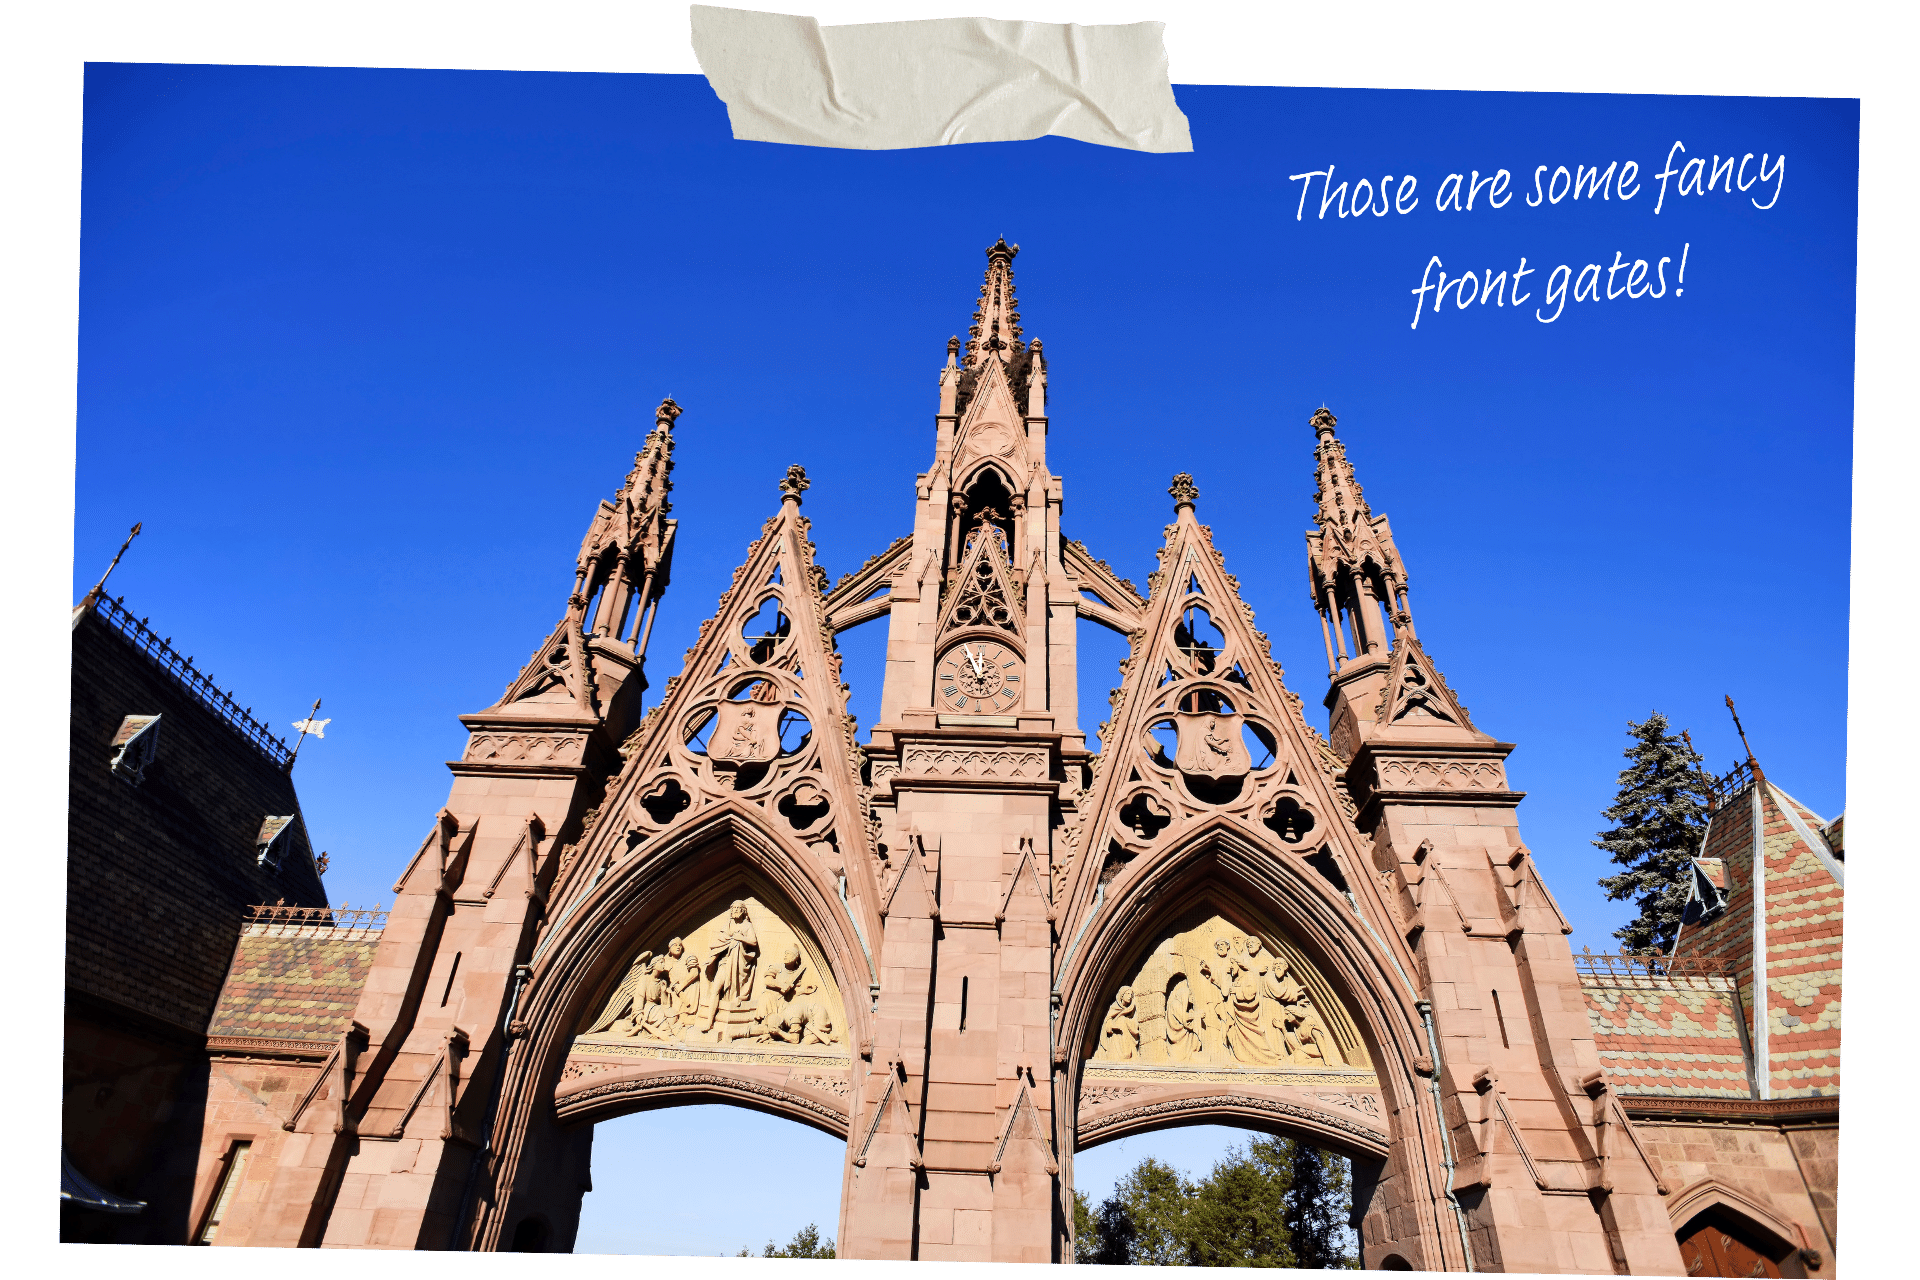 Green-Wood Cemetery is one of the must-visit historic sites in NYC. Image shows the famous Gothic-Revival style stone gates from ground level against a deep blue sky.